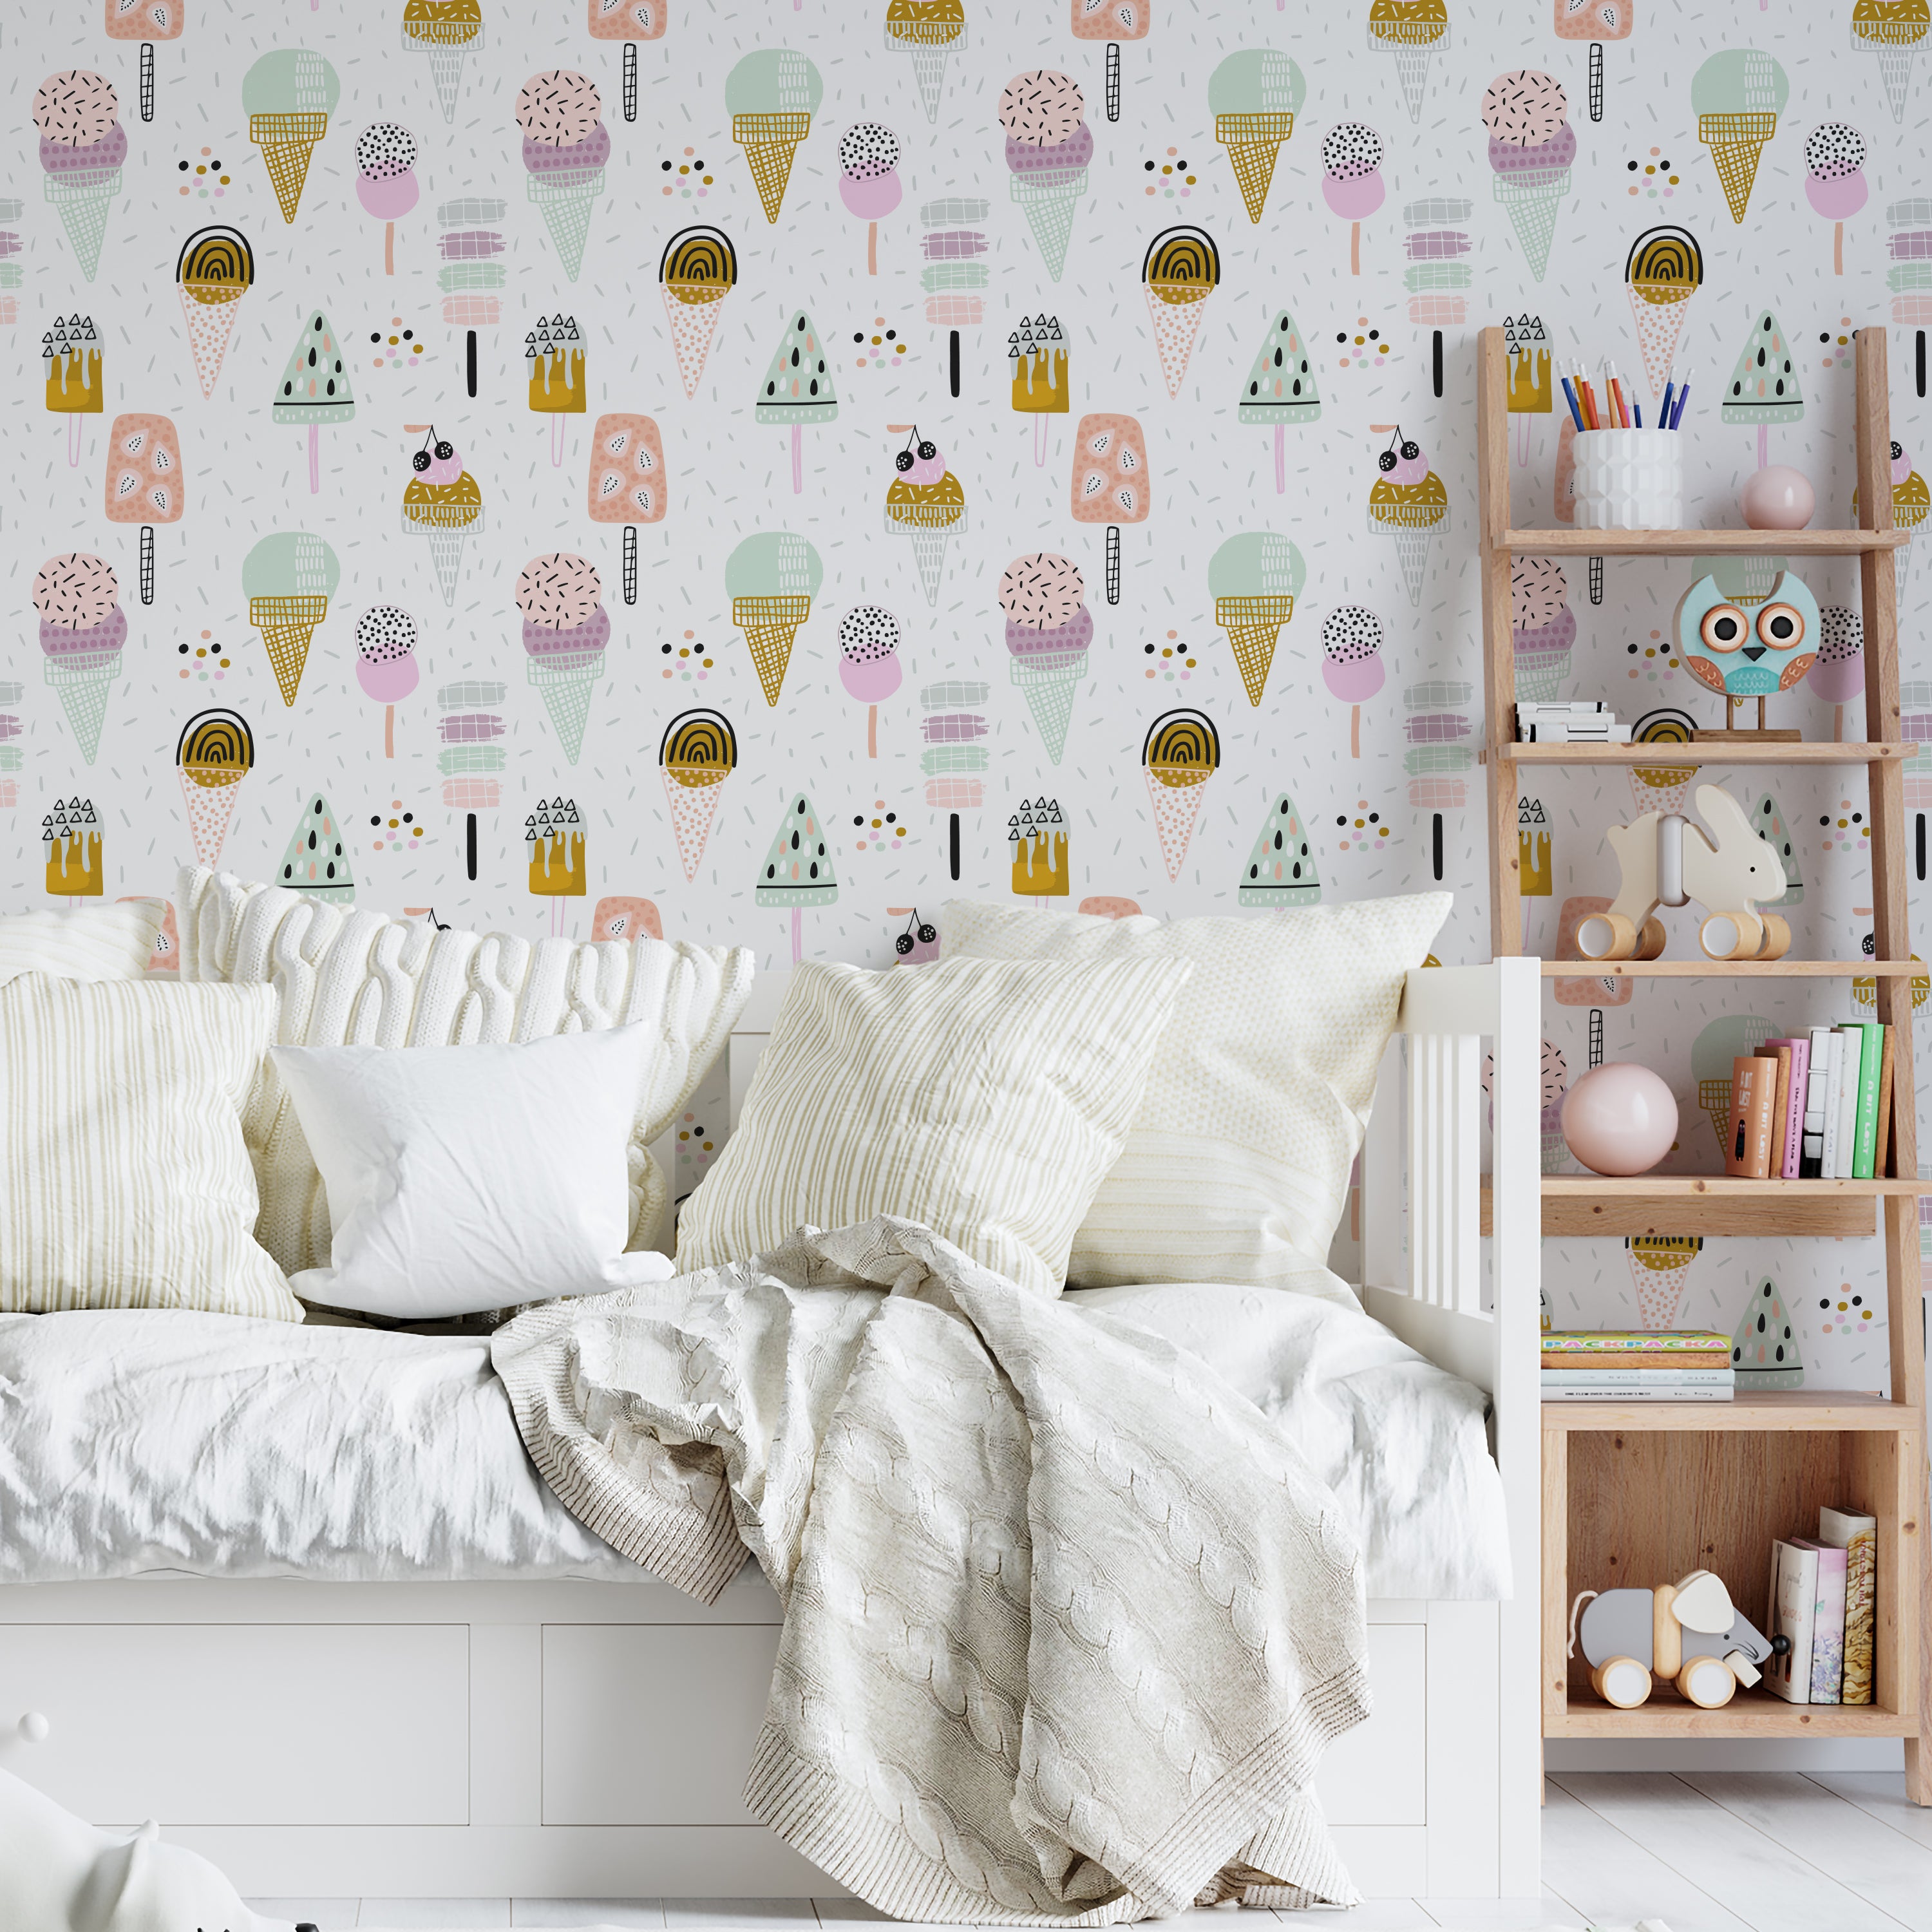 Children's bedroom showcasing walls adorned with playful ice cream cone and popsicle wallpaper in pastel colors, complementing a cozy corner filled with plush toys, books, and wooden shelving for a fun and inviting atmosphere.